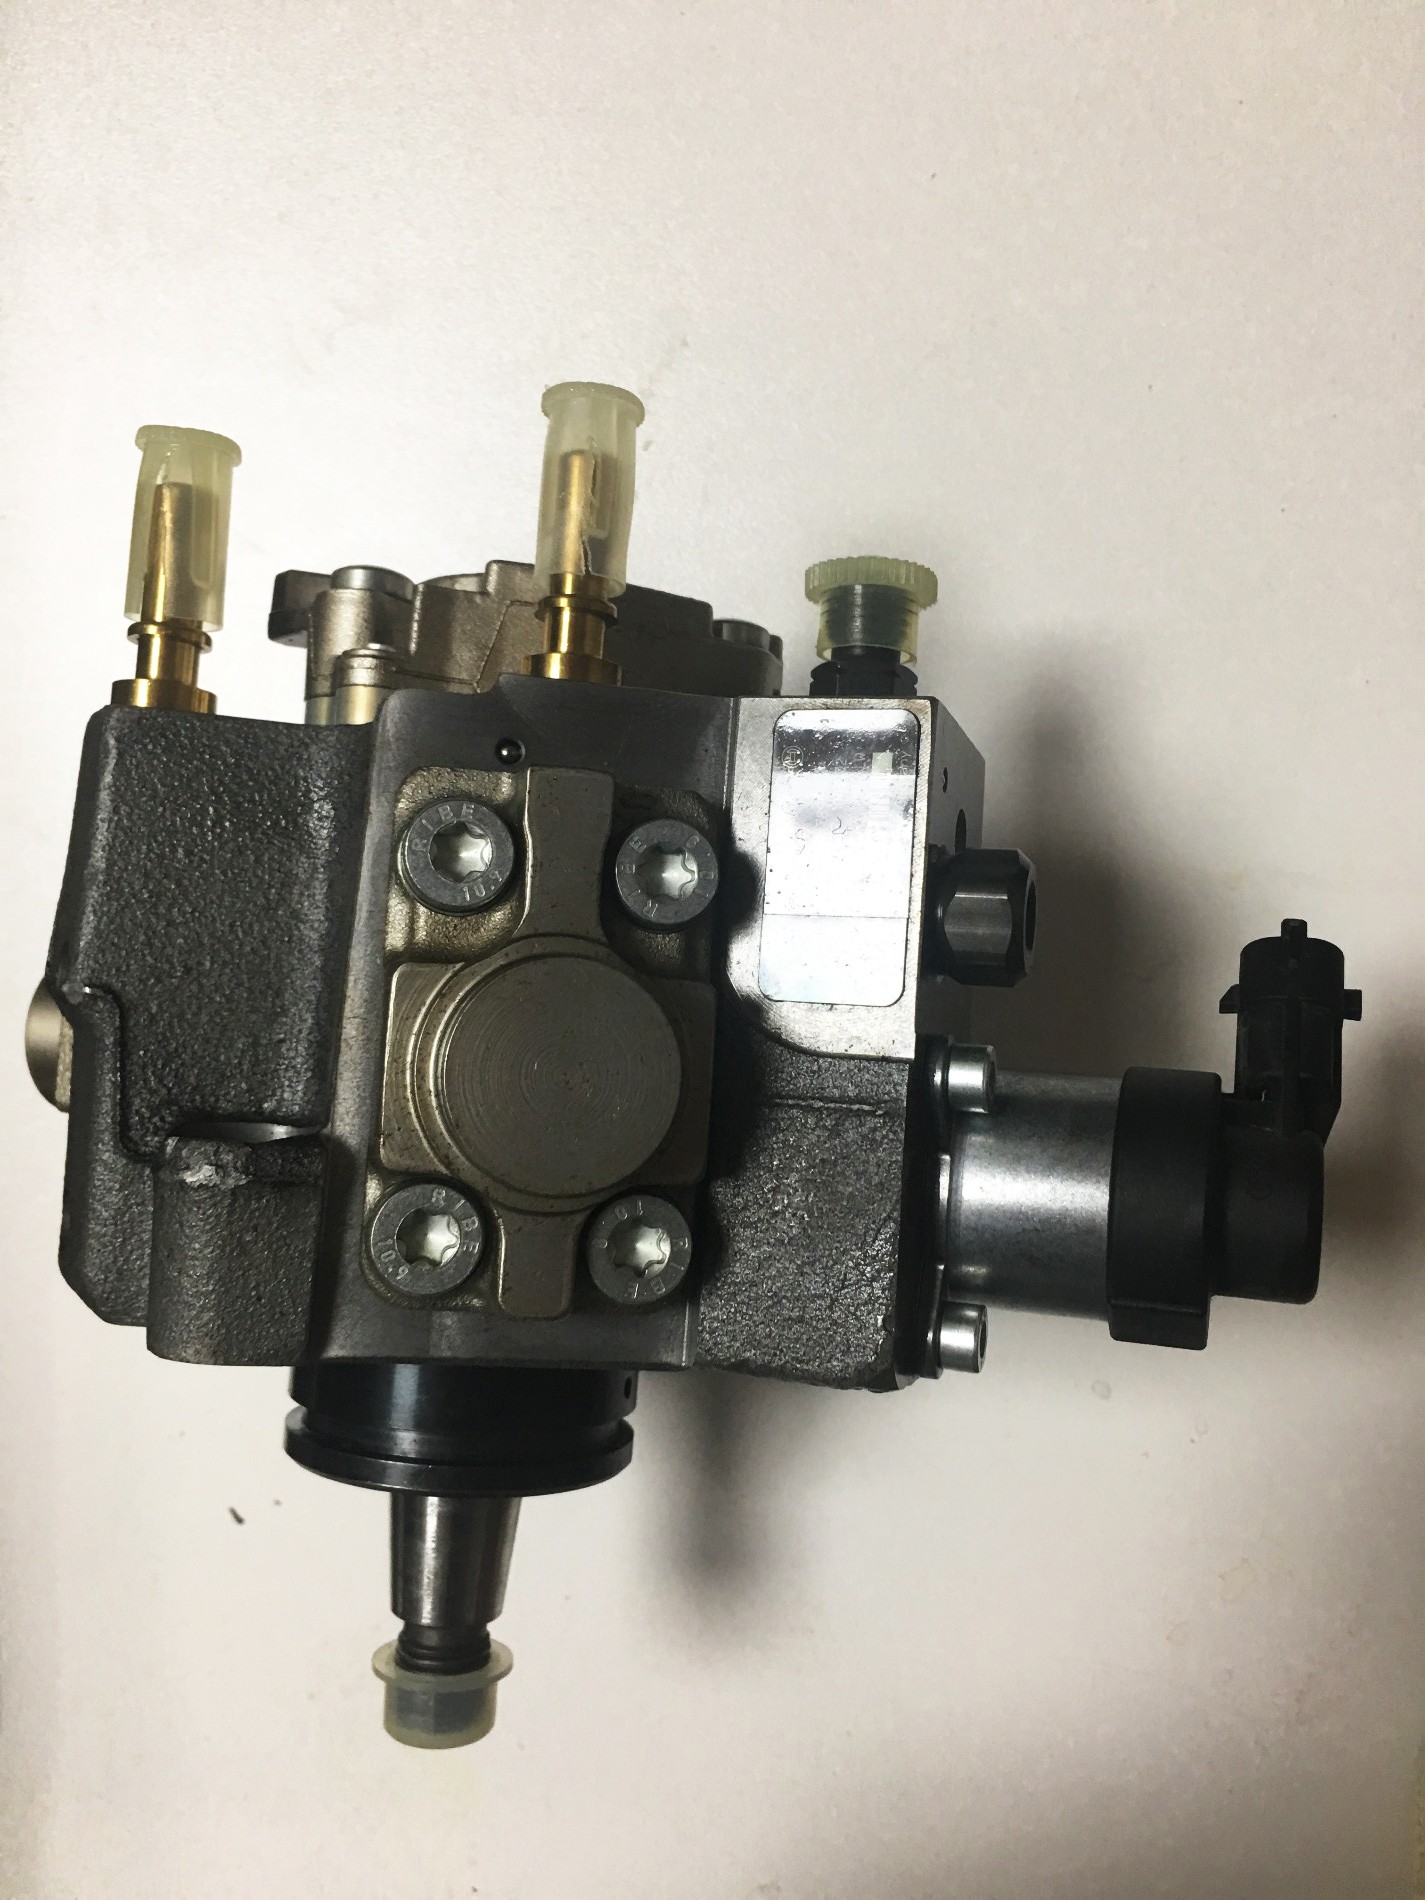 Supply ISBe ISDe QSB Diesel Fuel Injection Pump 0445020119, ISBe ISDe QSB Diesel Fuel Injection Pump 0445020119 Factory Quotes, ISBe ISDe QSB Diesel Fuel Injection Pump 0445020119 Producers OEM